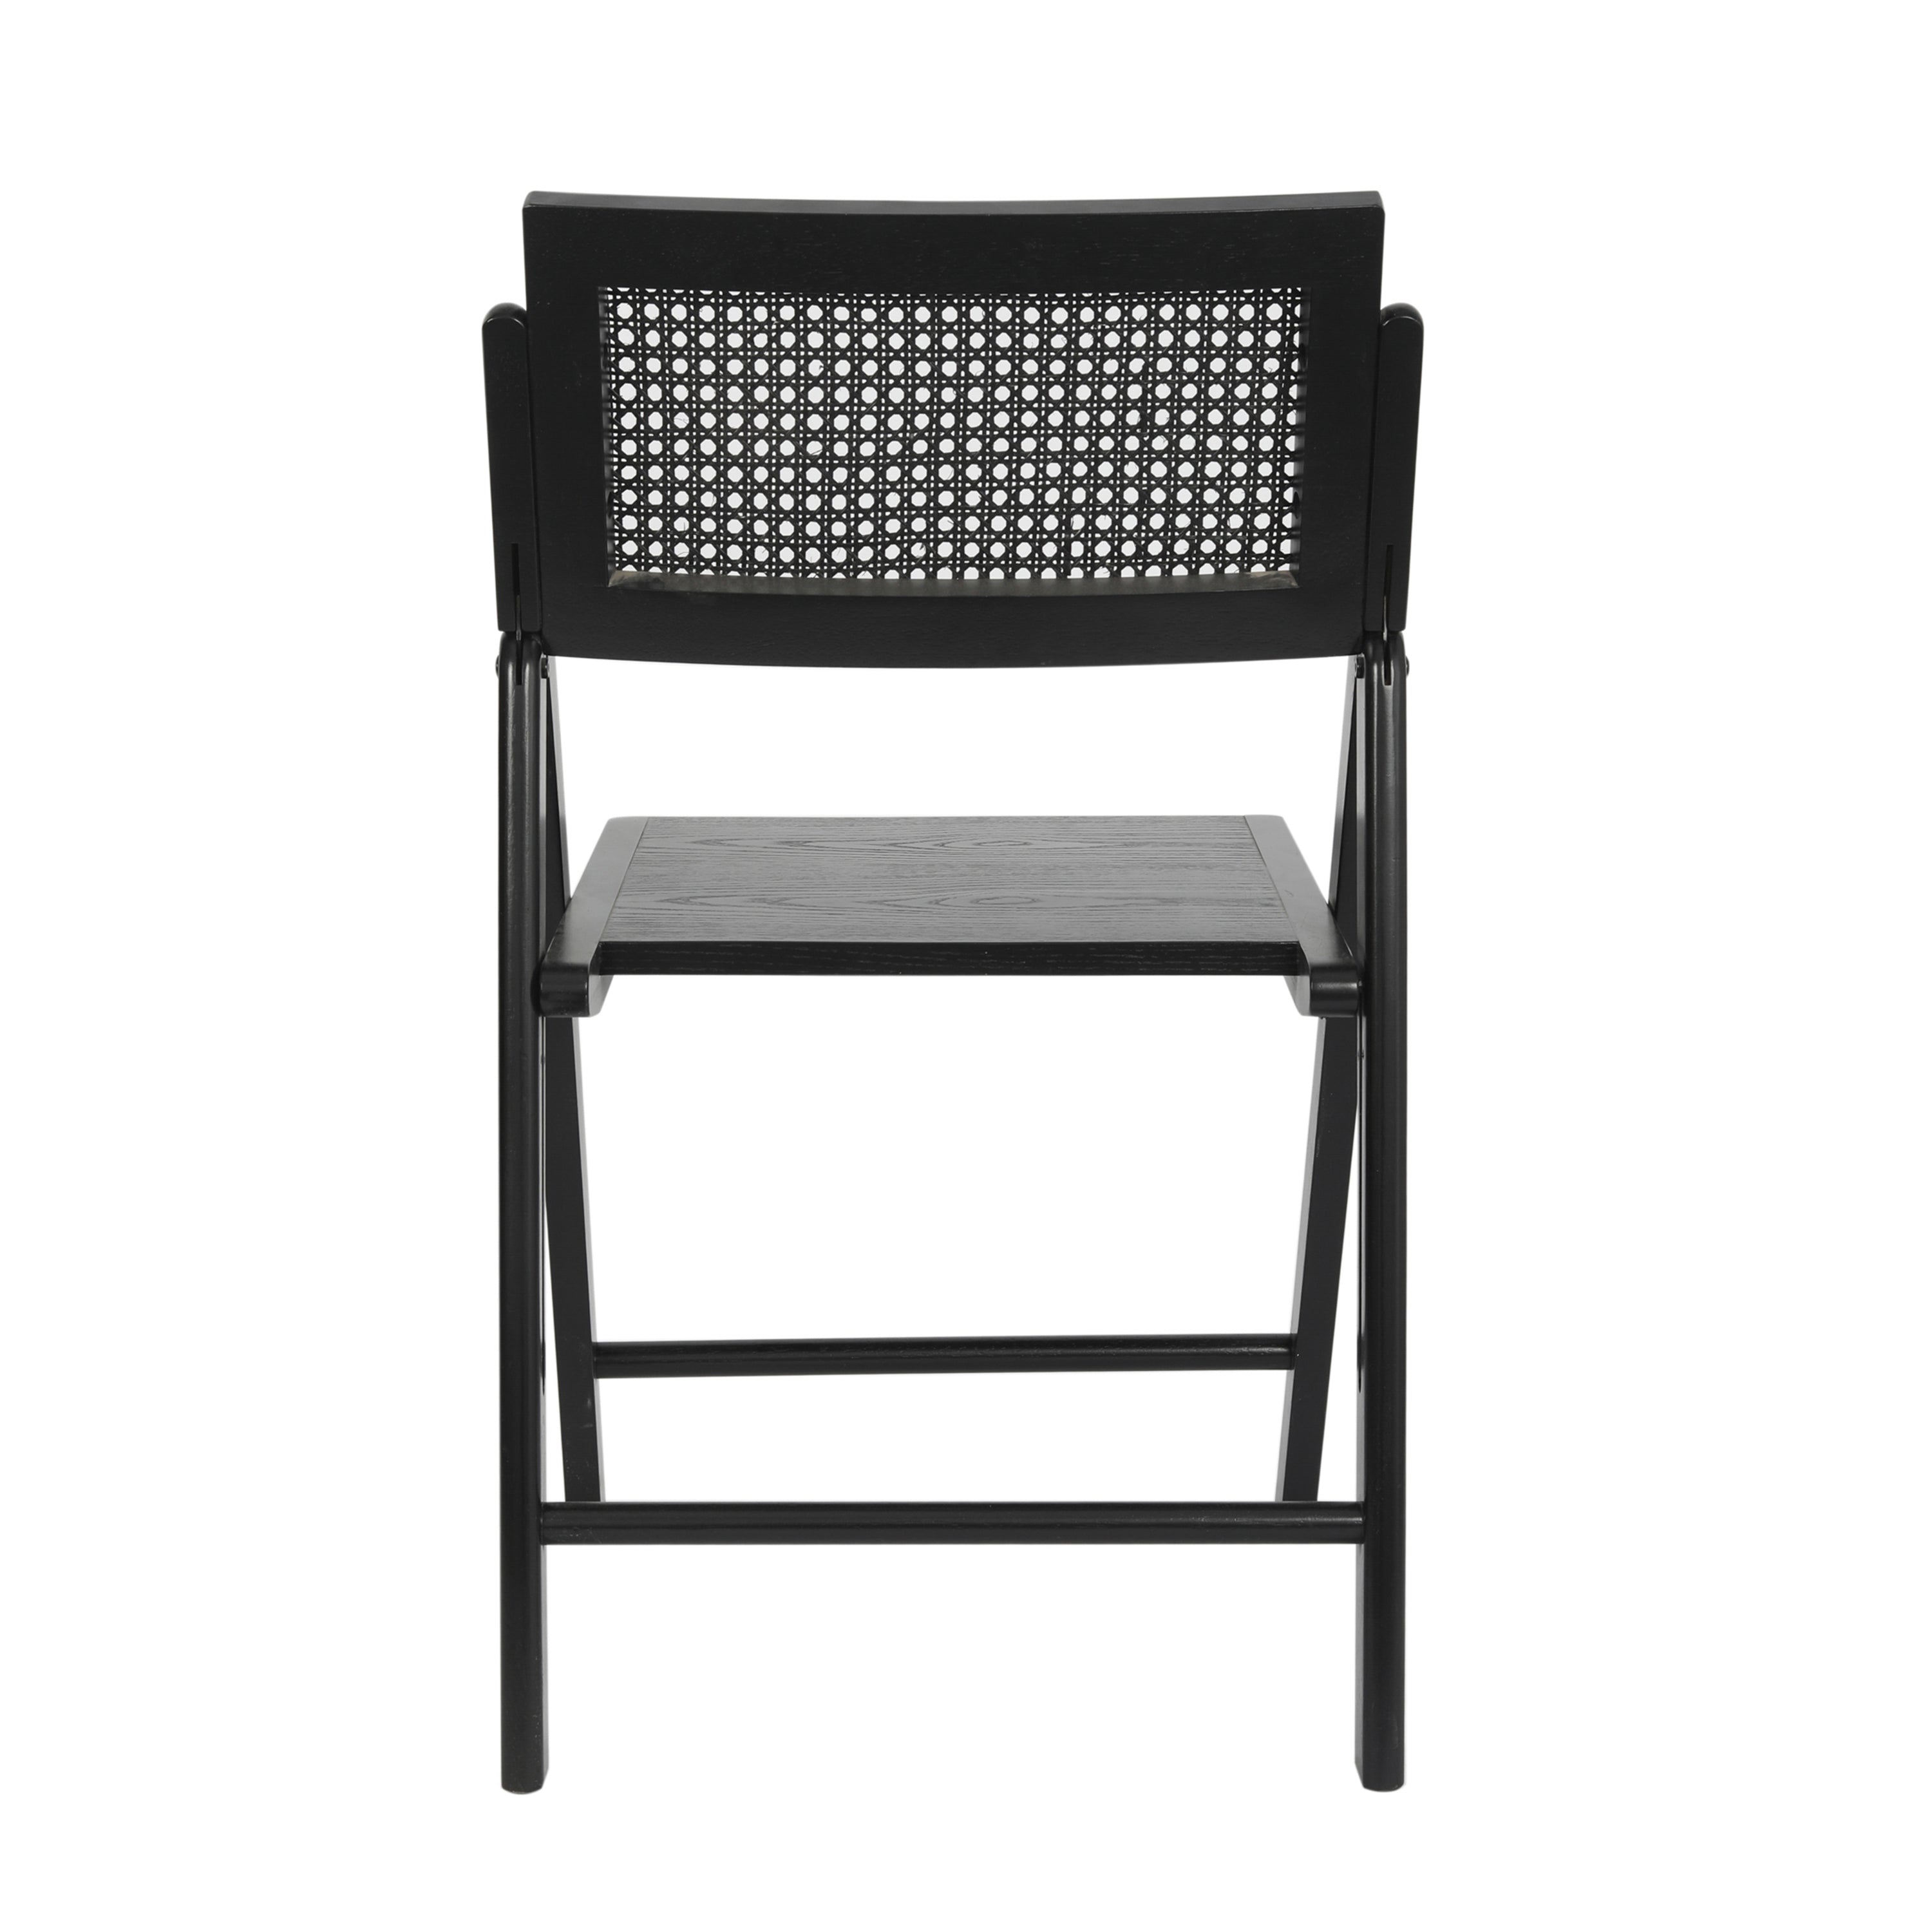 Galene Set of 2 Cane Rattan Folding Chairs with Solid Wood Frame and Seat and Ventilated Back, Perfect for Events or Additional Seating-Folding Chair-Flash Furniture-Wall2Wall Furnishings